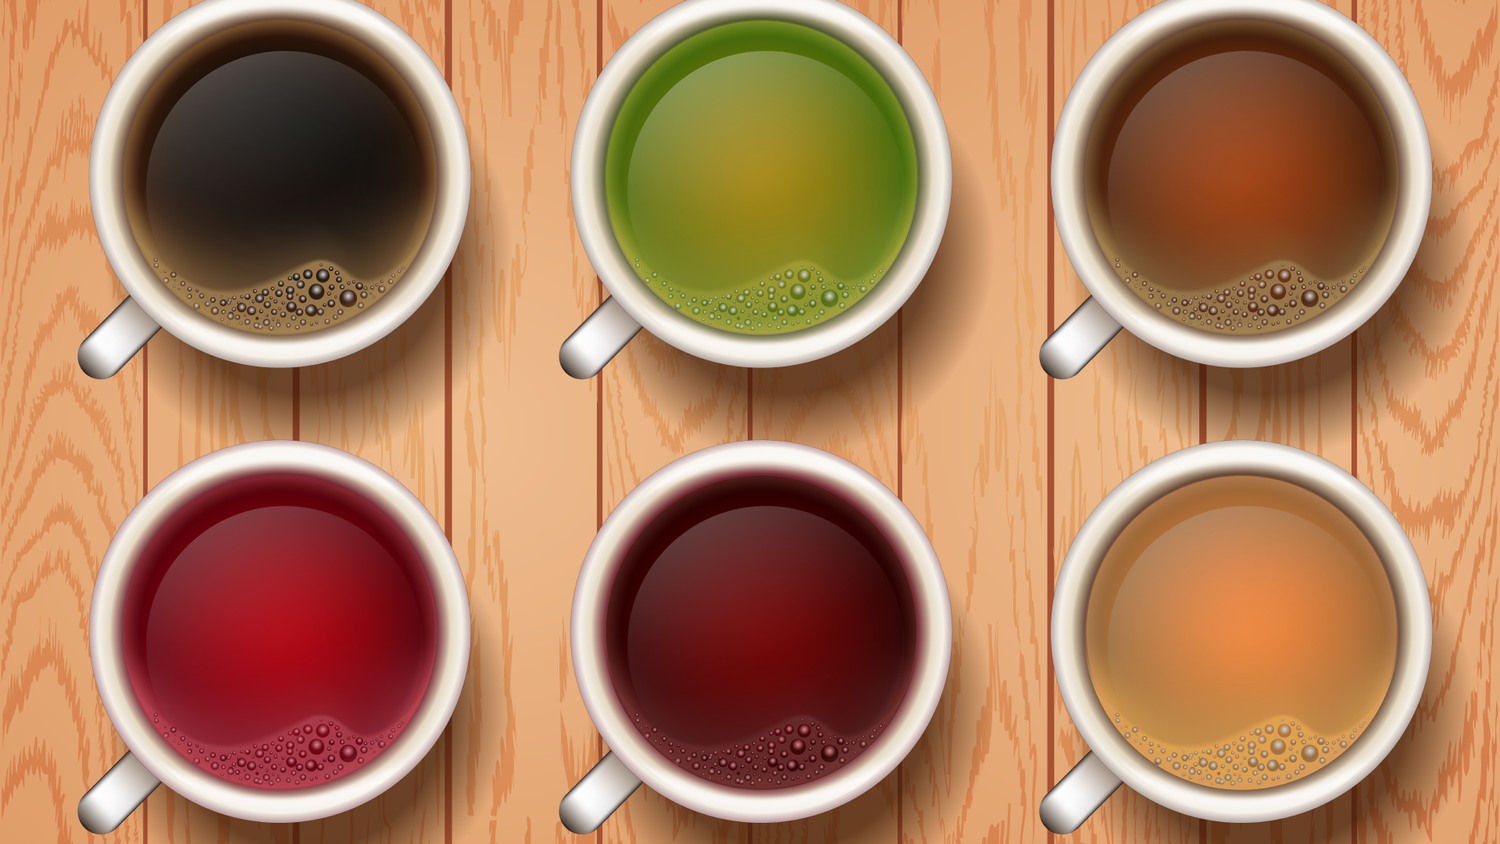 A Brief History of Tea and Its Health Benefits